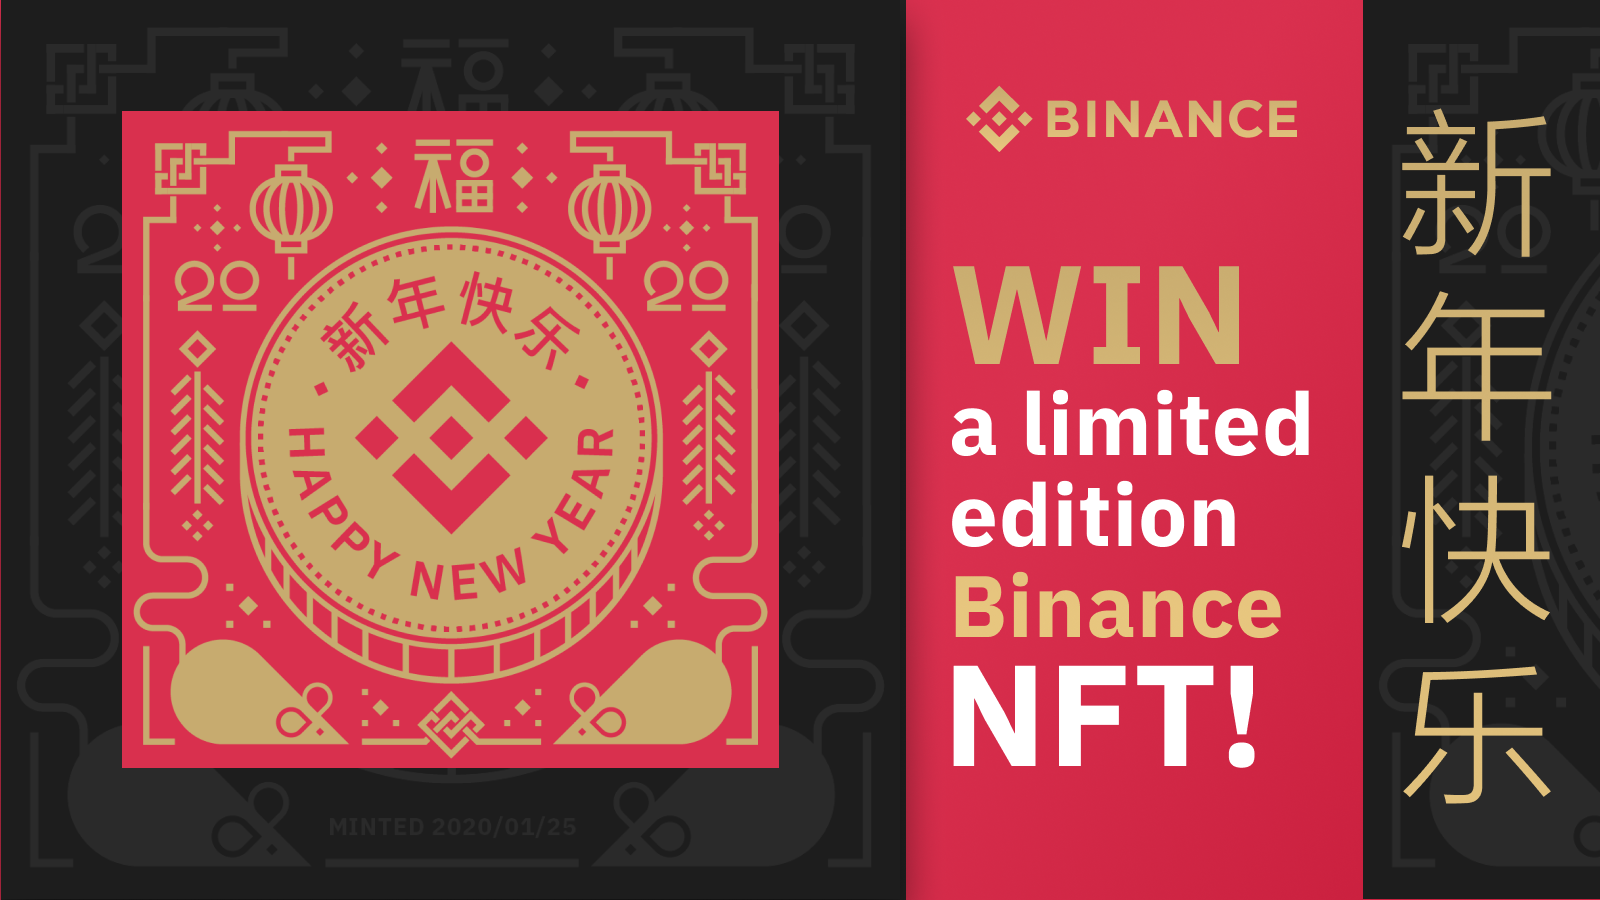 Binance Airdrop - Claim free Limited Edition NFT tokens with